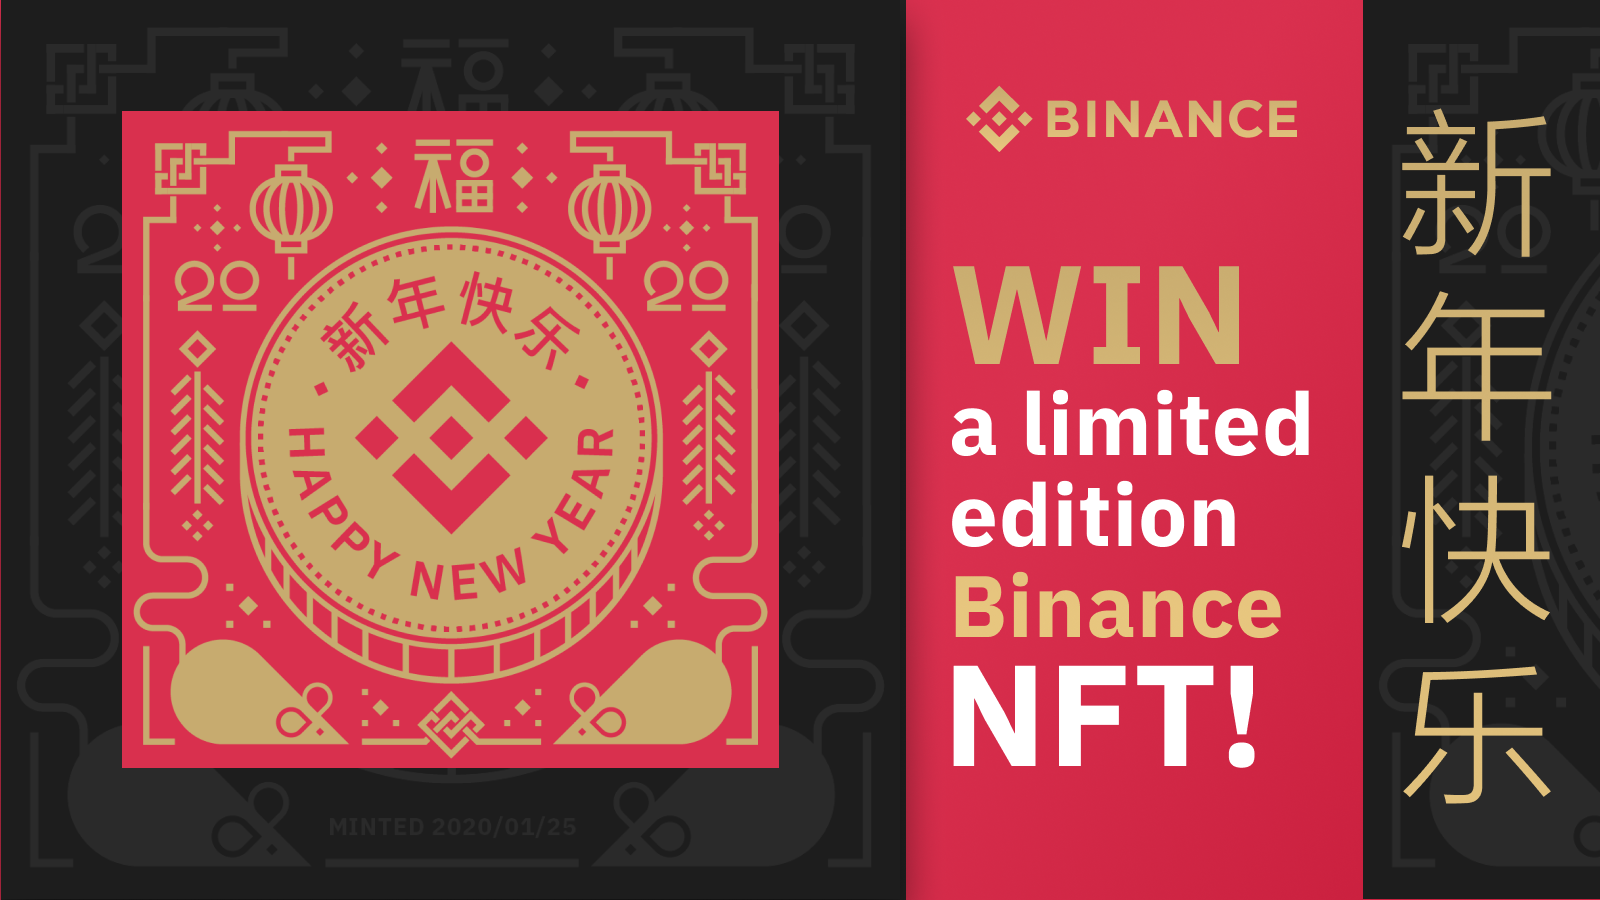 Binance Airdrop - Claim free Limited Edition NFT tokens with